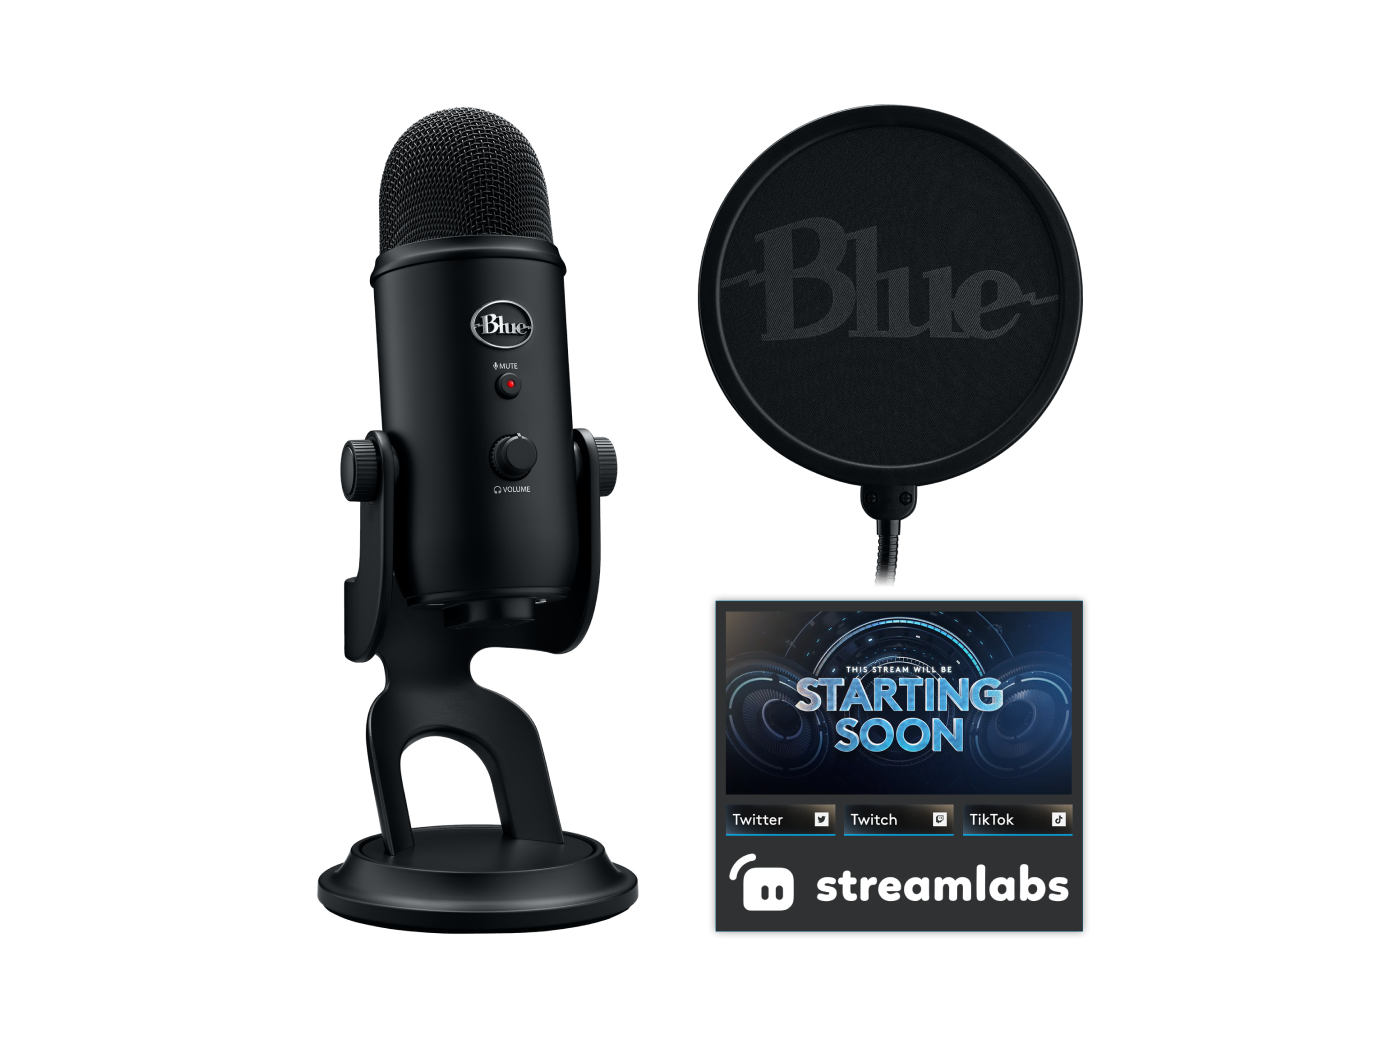 https://resource.logitech.com/content/dam/gaming/en/products/microphones/yeti-game-streaming-kit/gallery/blue-yeti-mic-streaming-kit-gallery-1.png